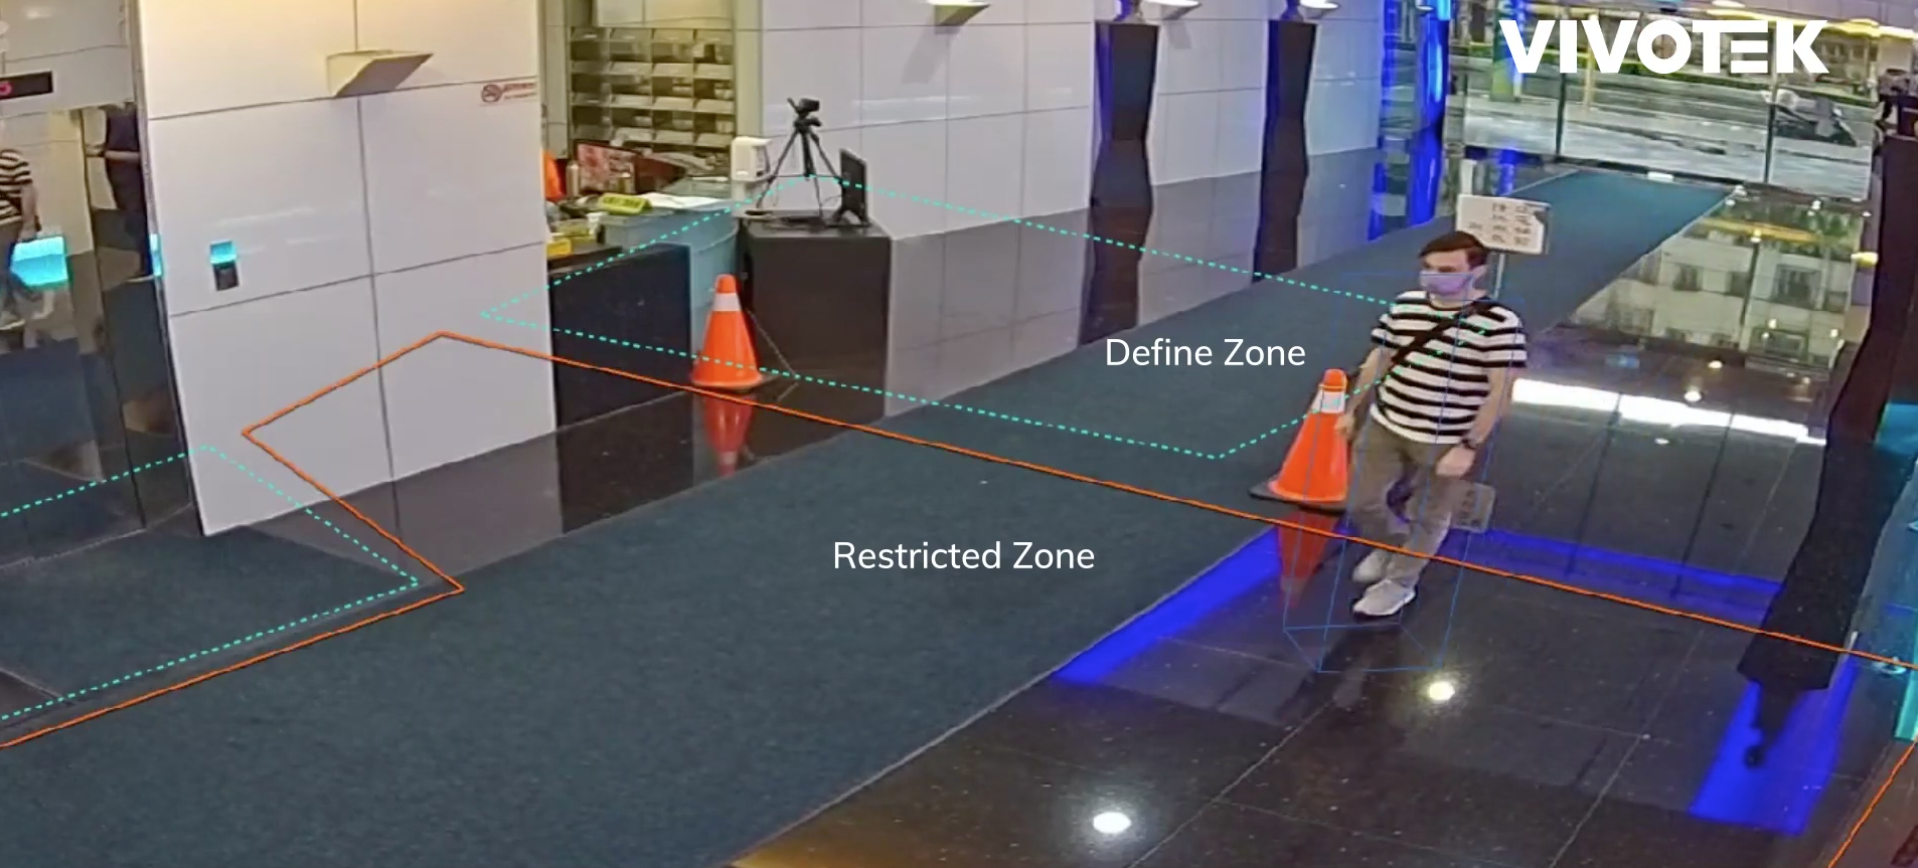 Restricted_zone_detection02.png